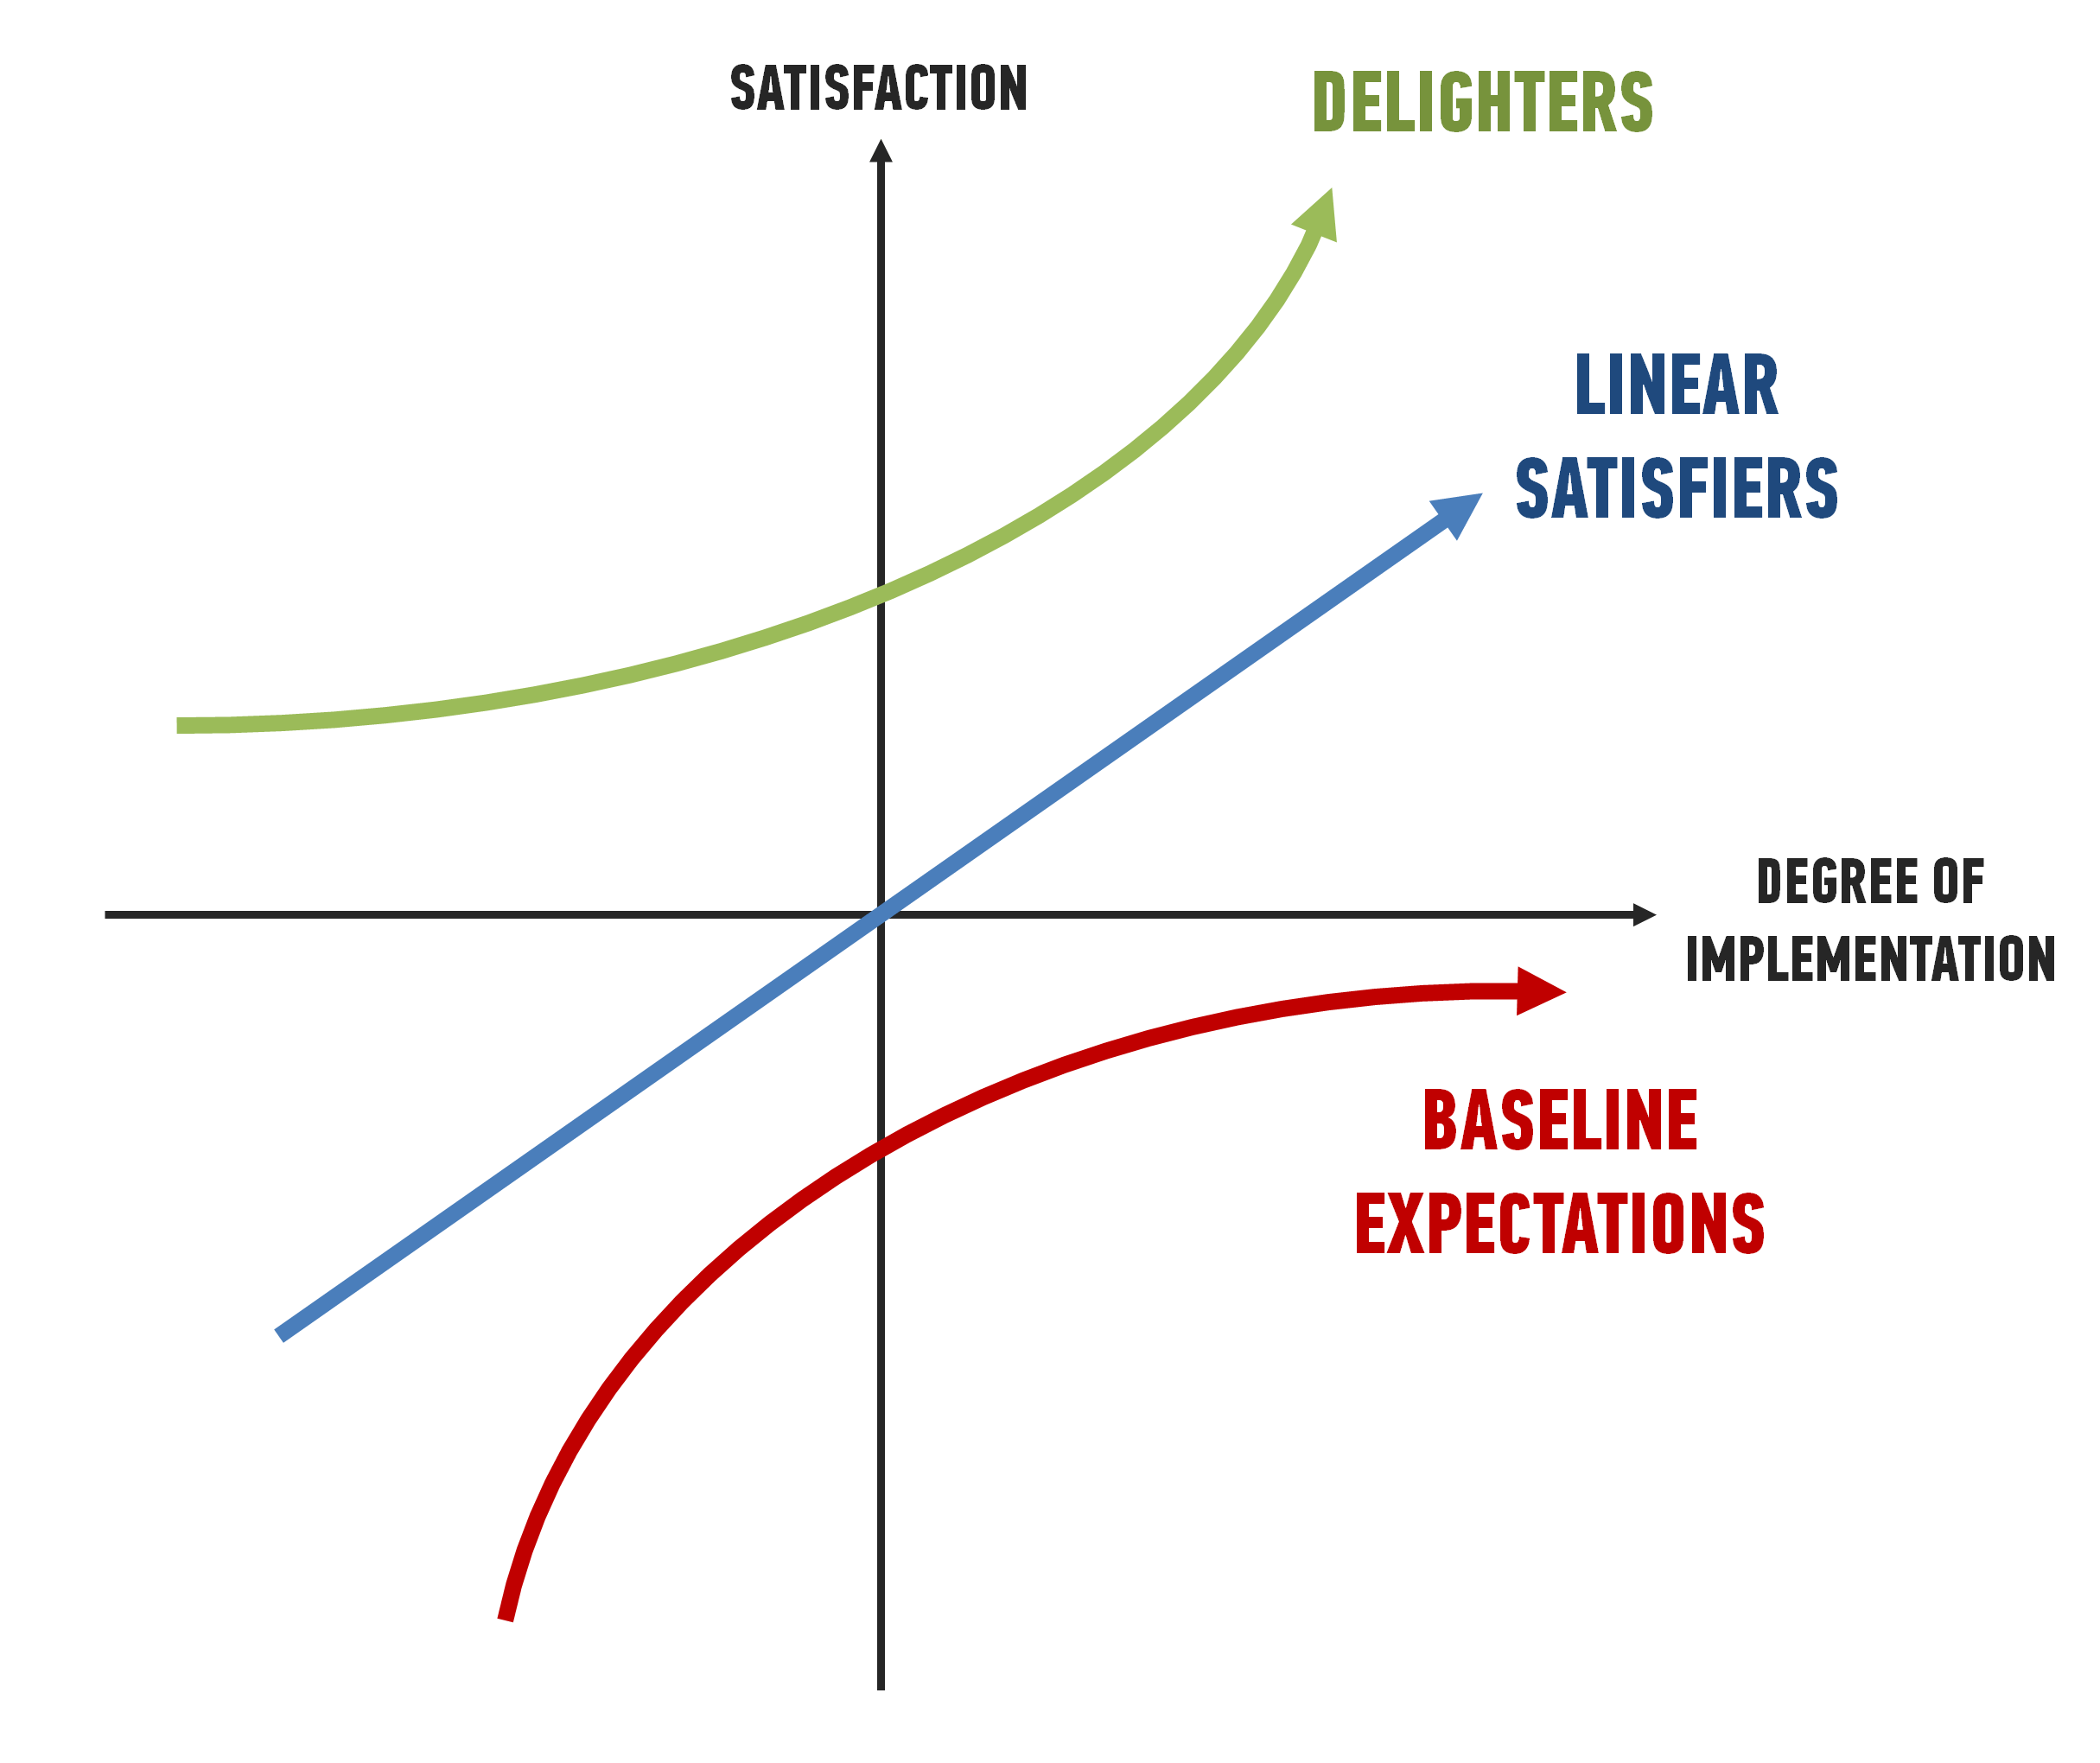 37 Unexpected delights a geek’s guide to the Kano model I Manage